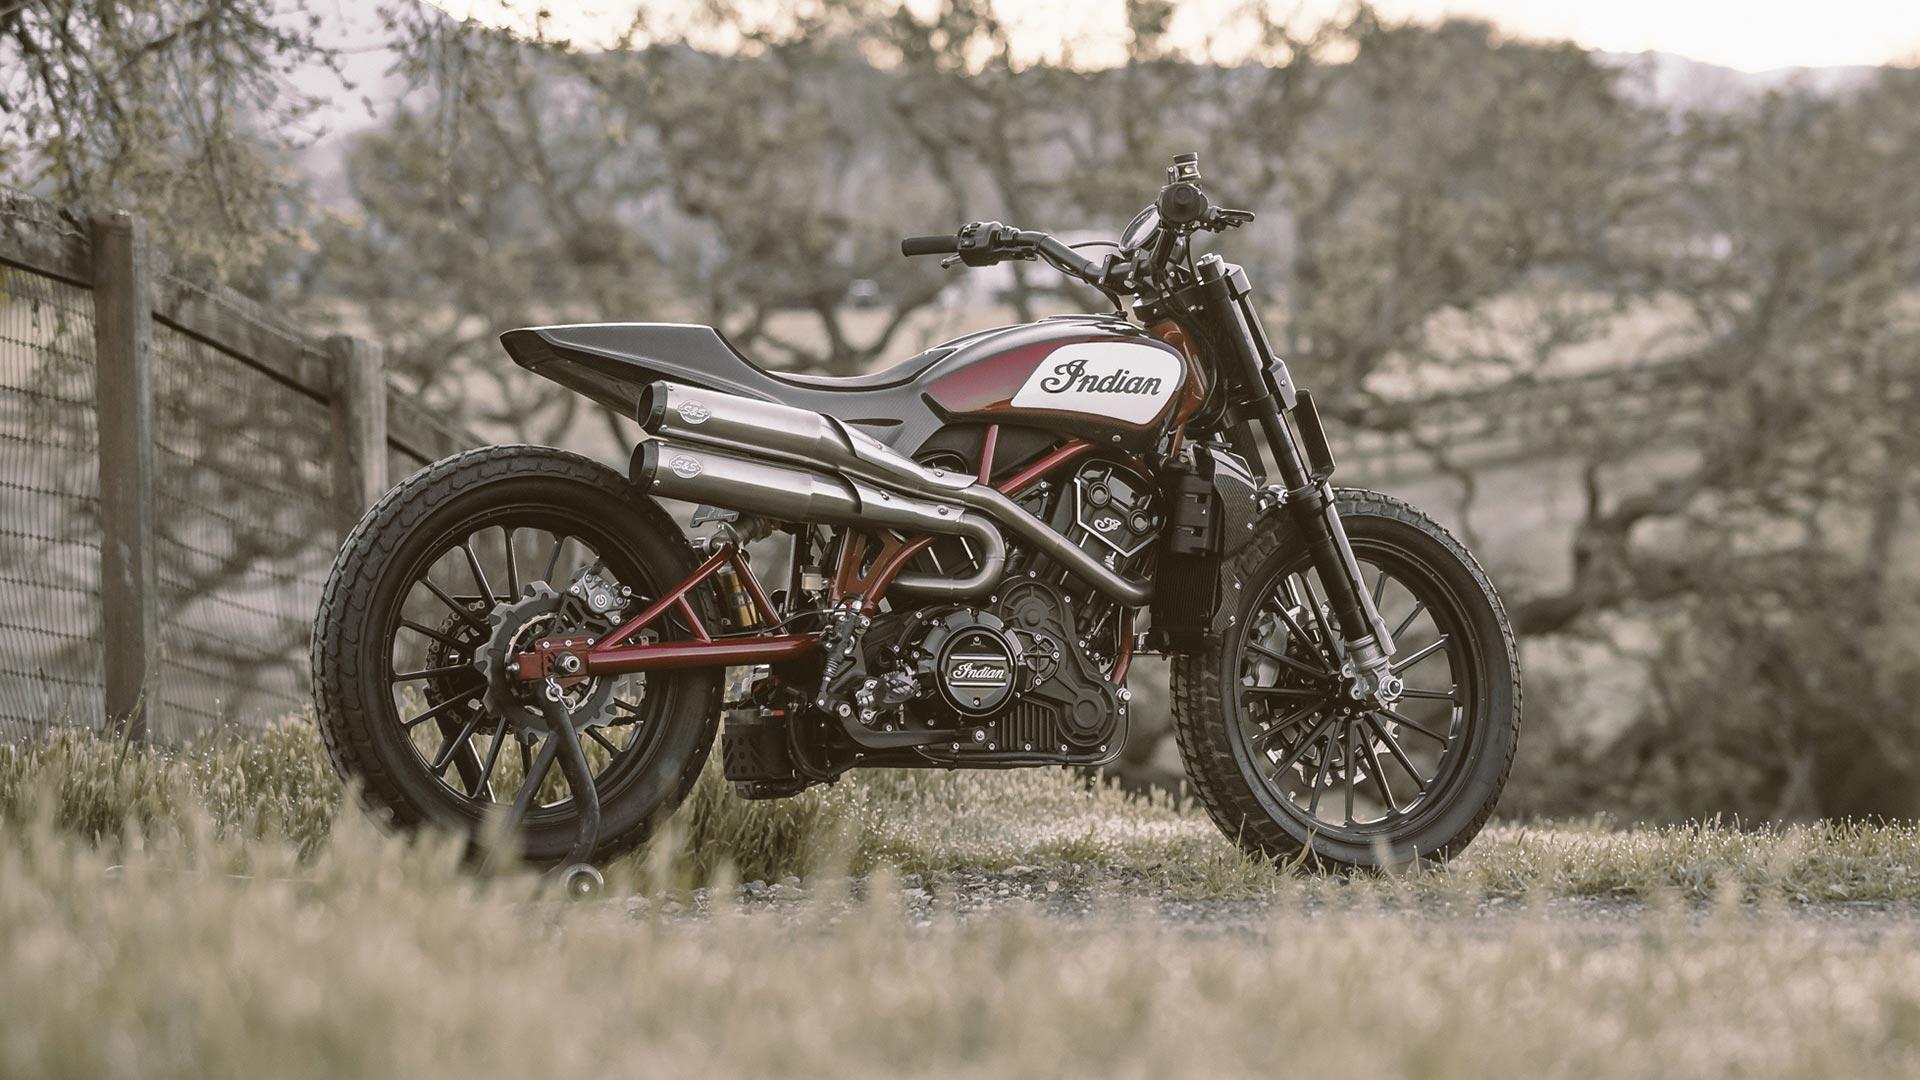 Flat track inspired Indian FTR1200 due. Motorcycle News, Sport and Reviews